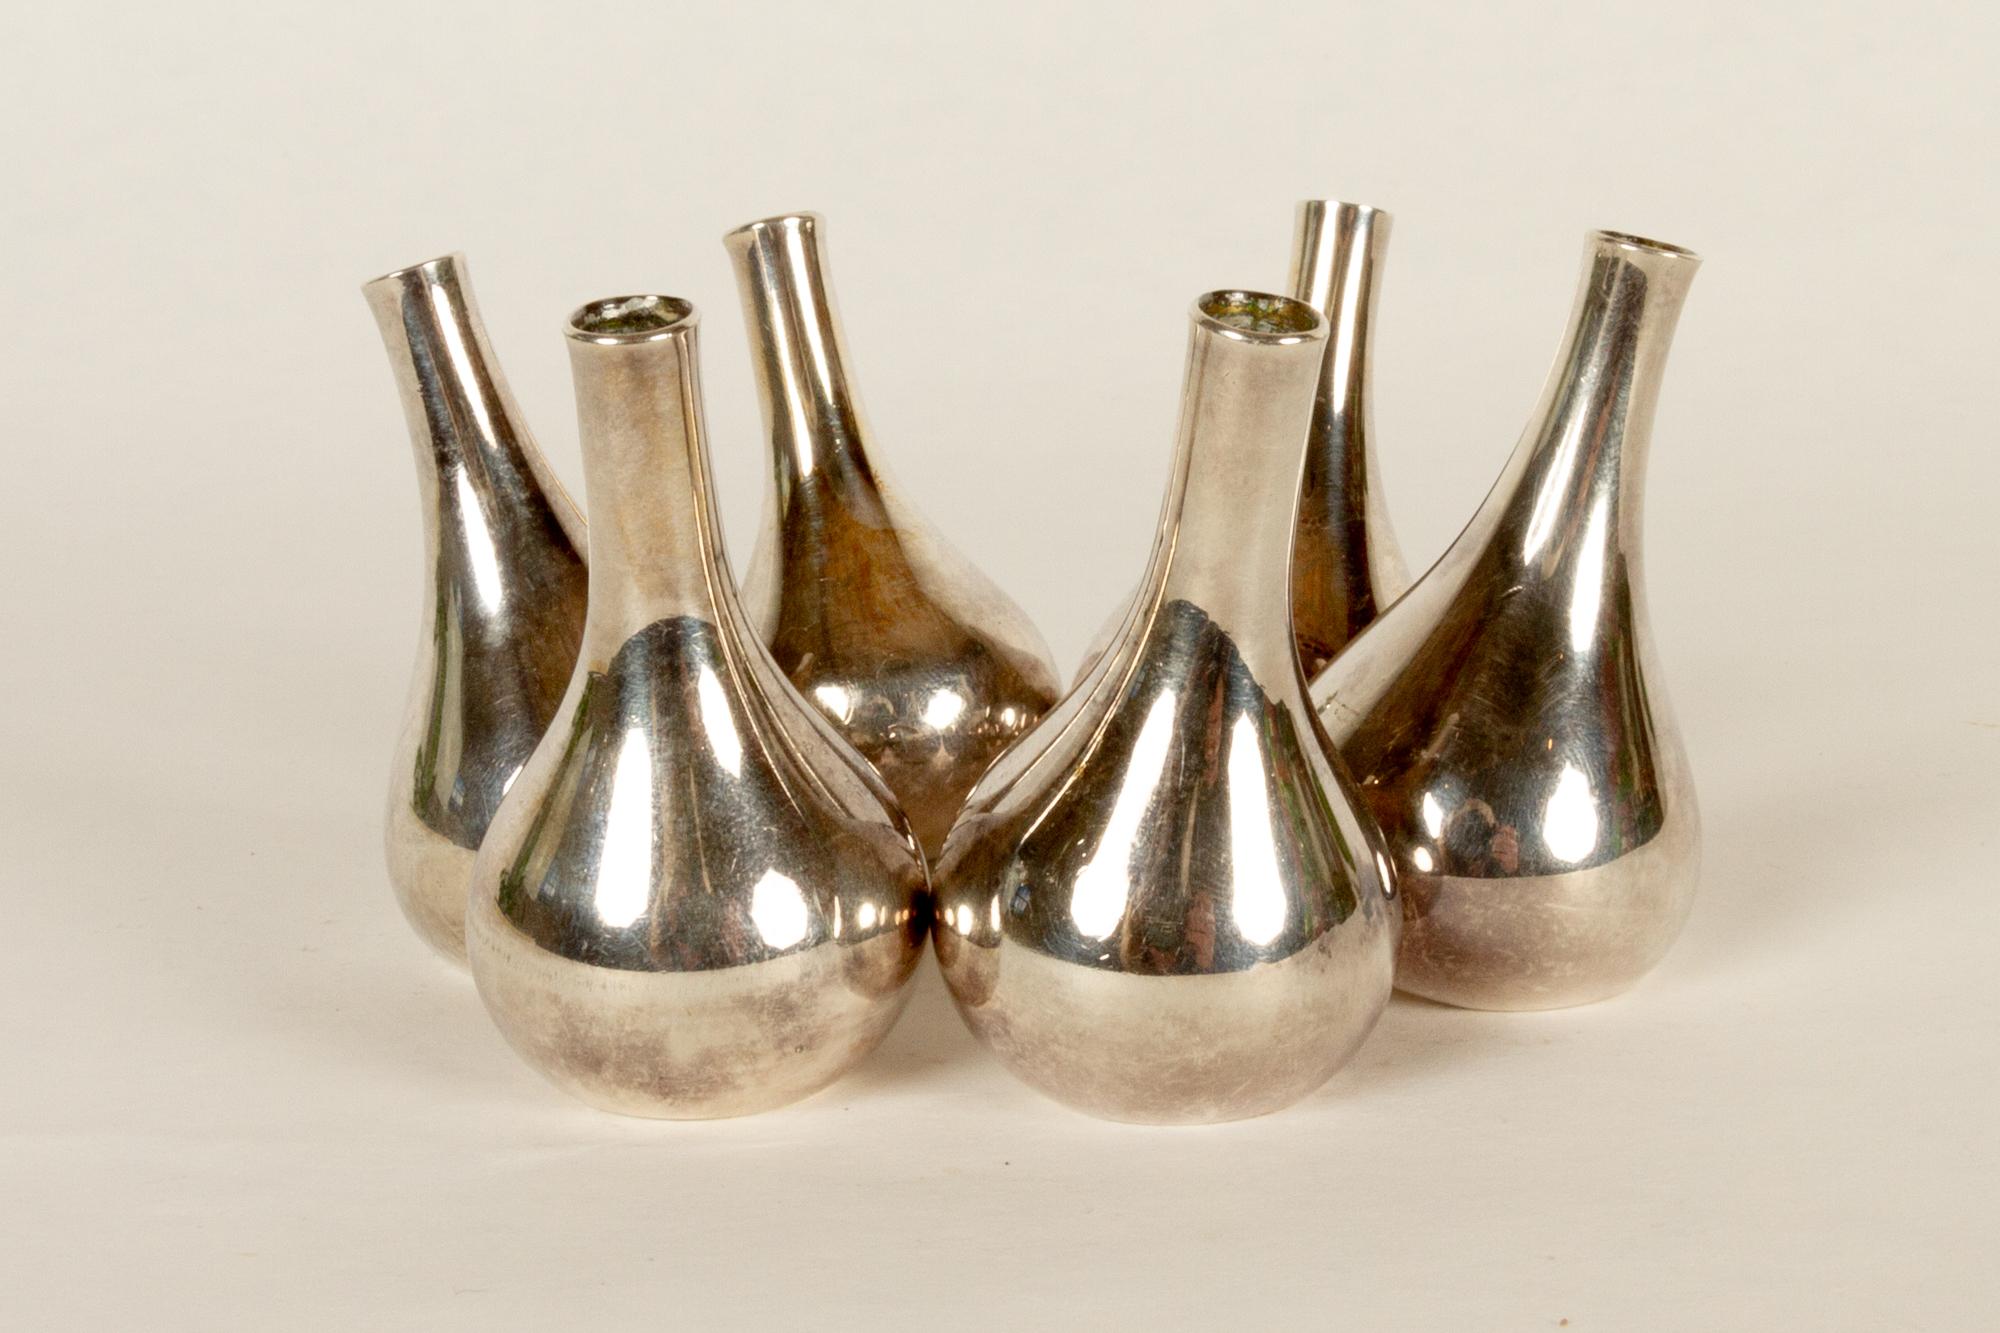 Mid-20th Century Candleholders by Jens H. Quistgaard for Dansk Designs 1960s Set of 6